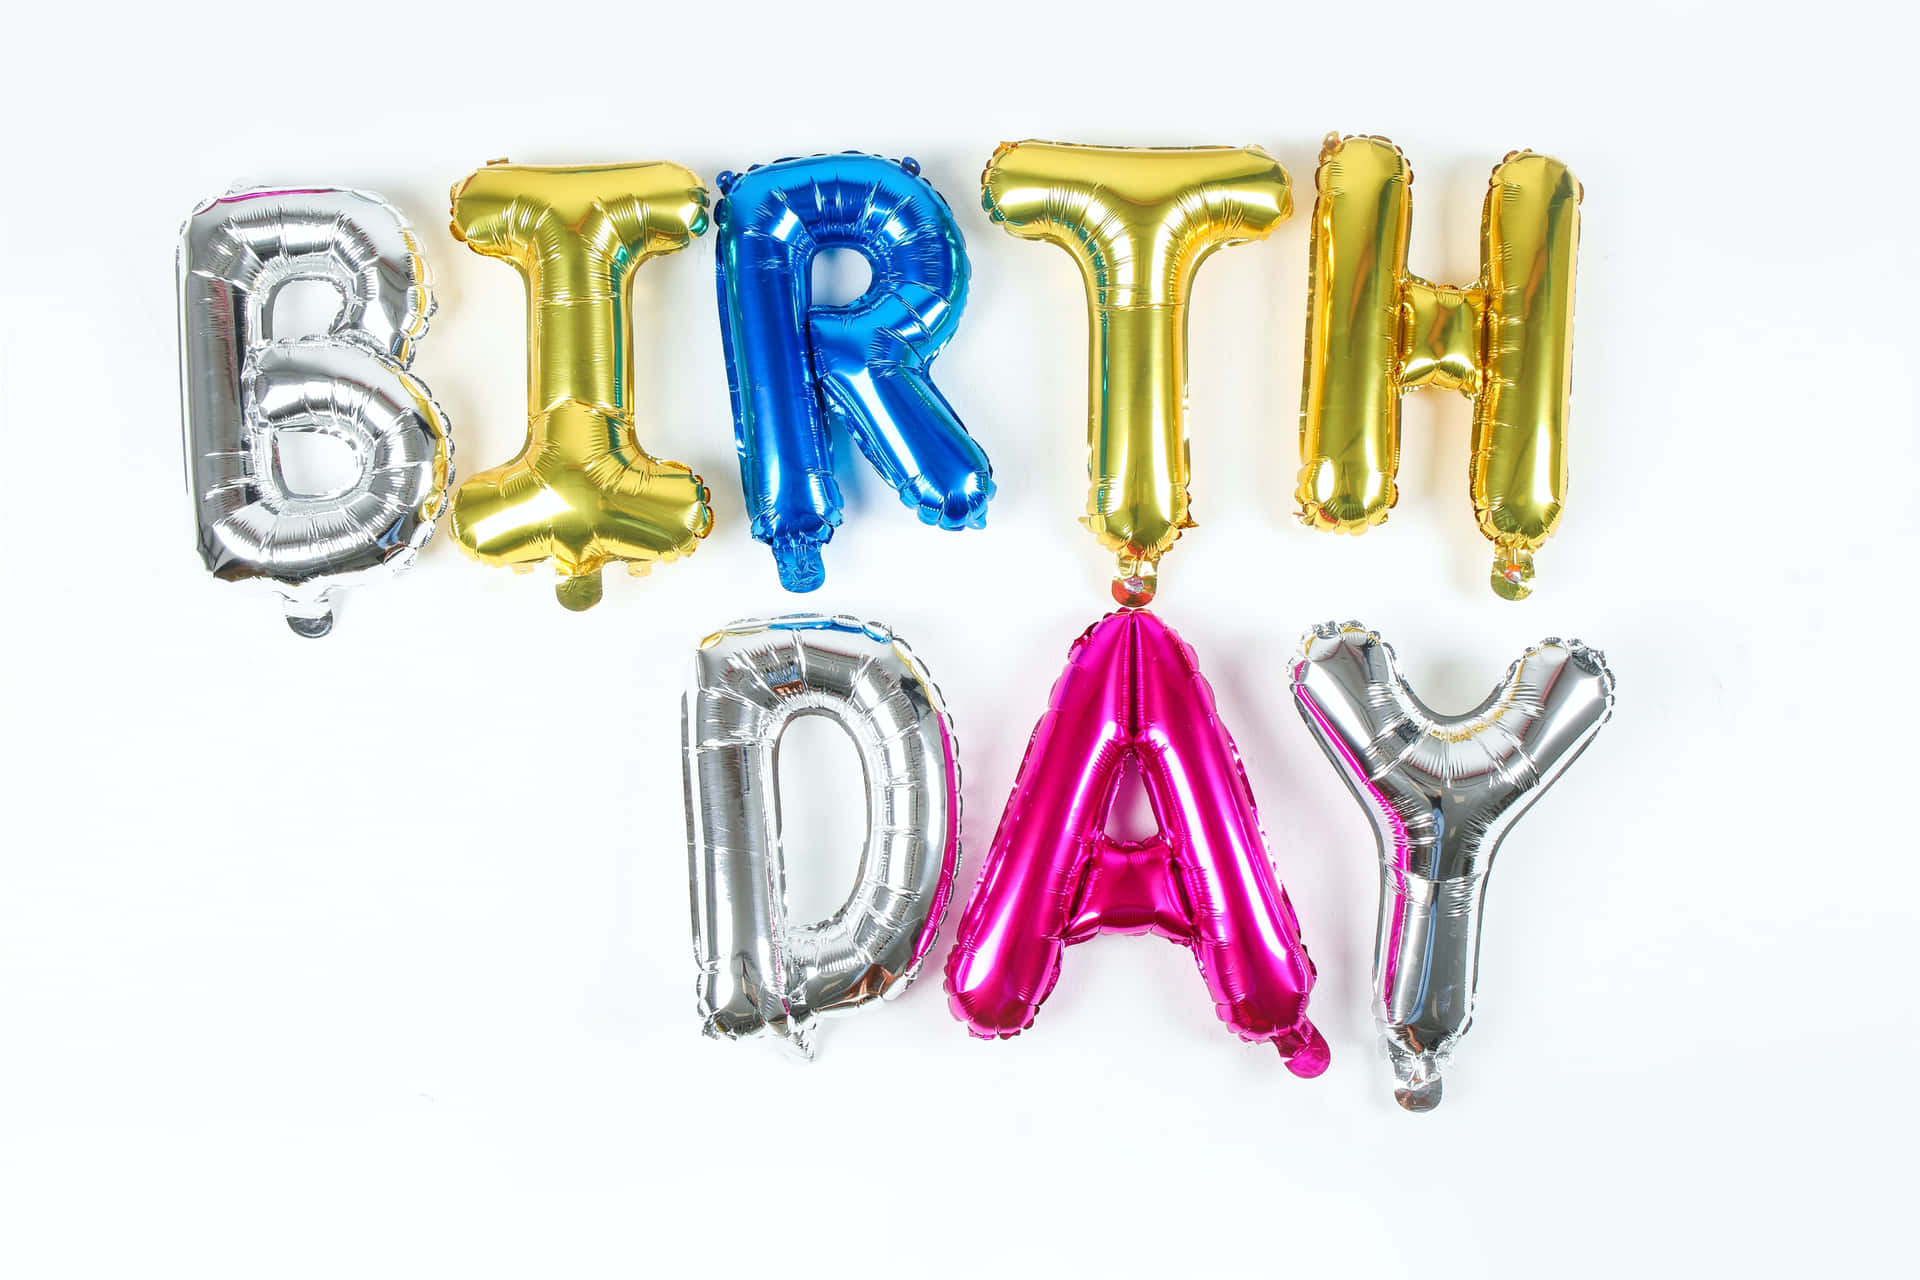 A Group Of Foil Balloons With The Word Birthday Day